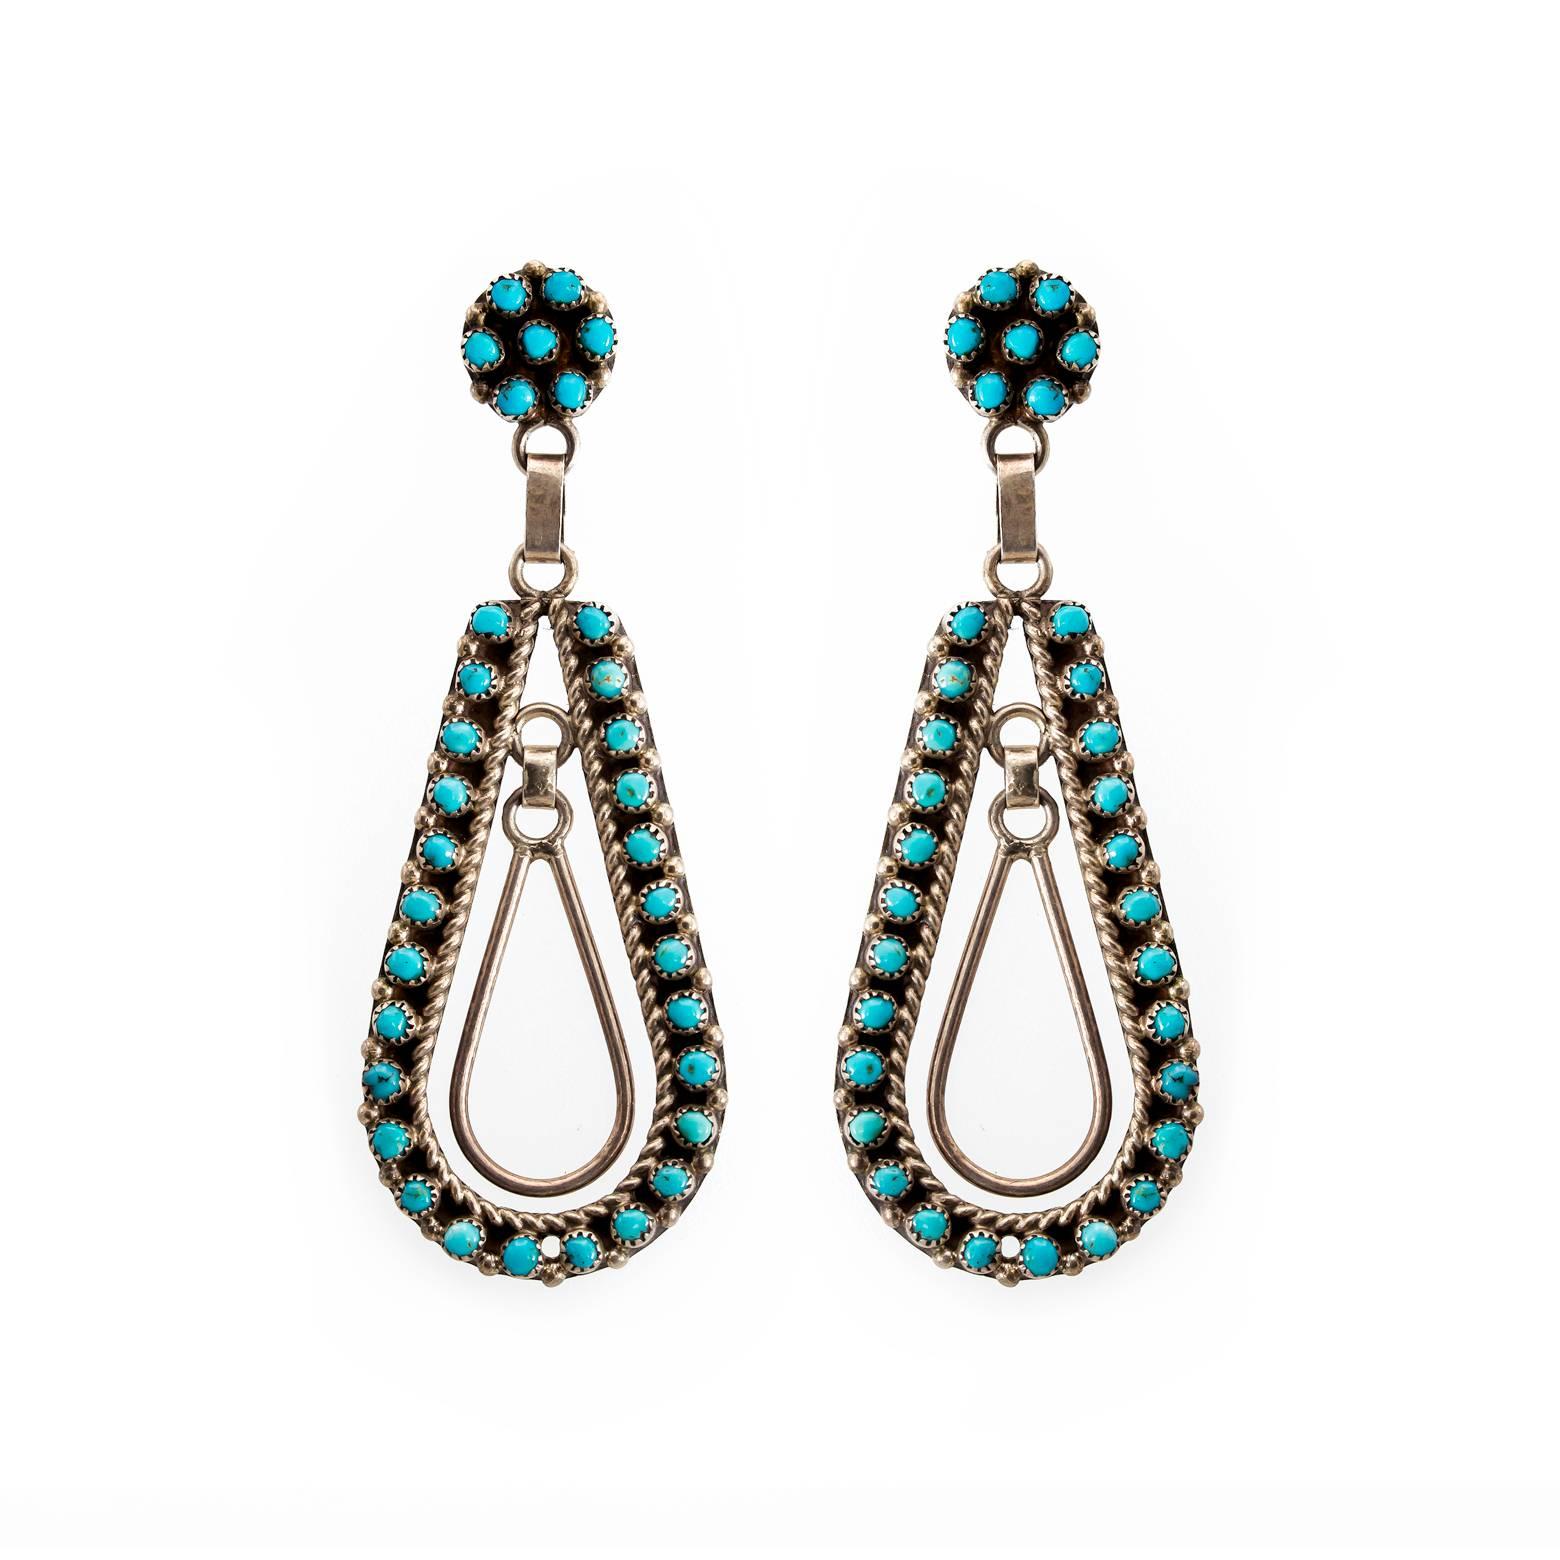 Turquoise and Sterling Silver Dangling Hoops with Post Backs